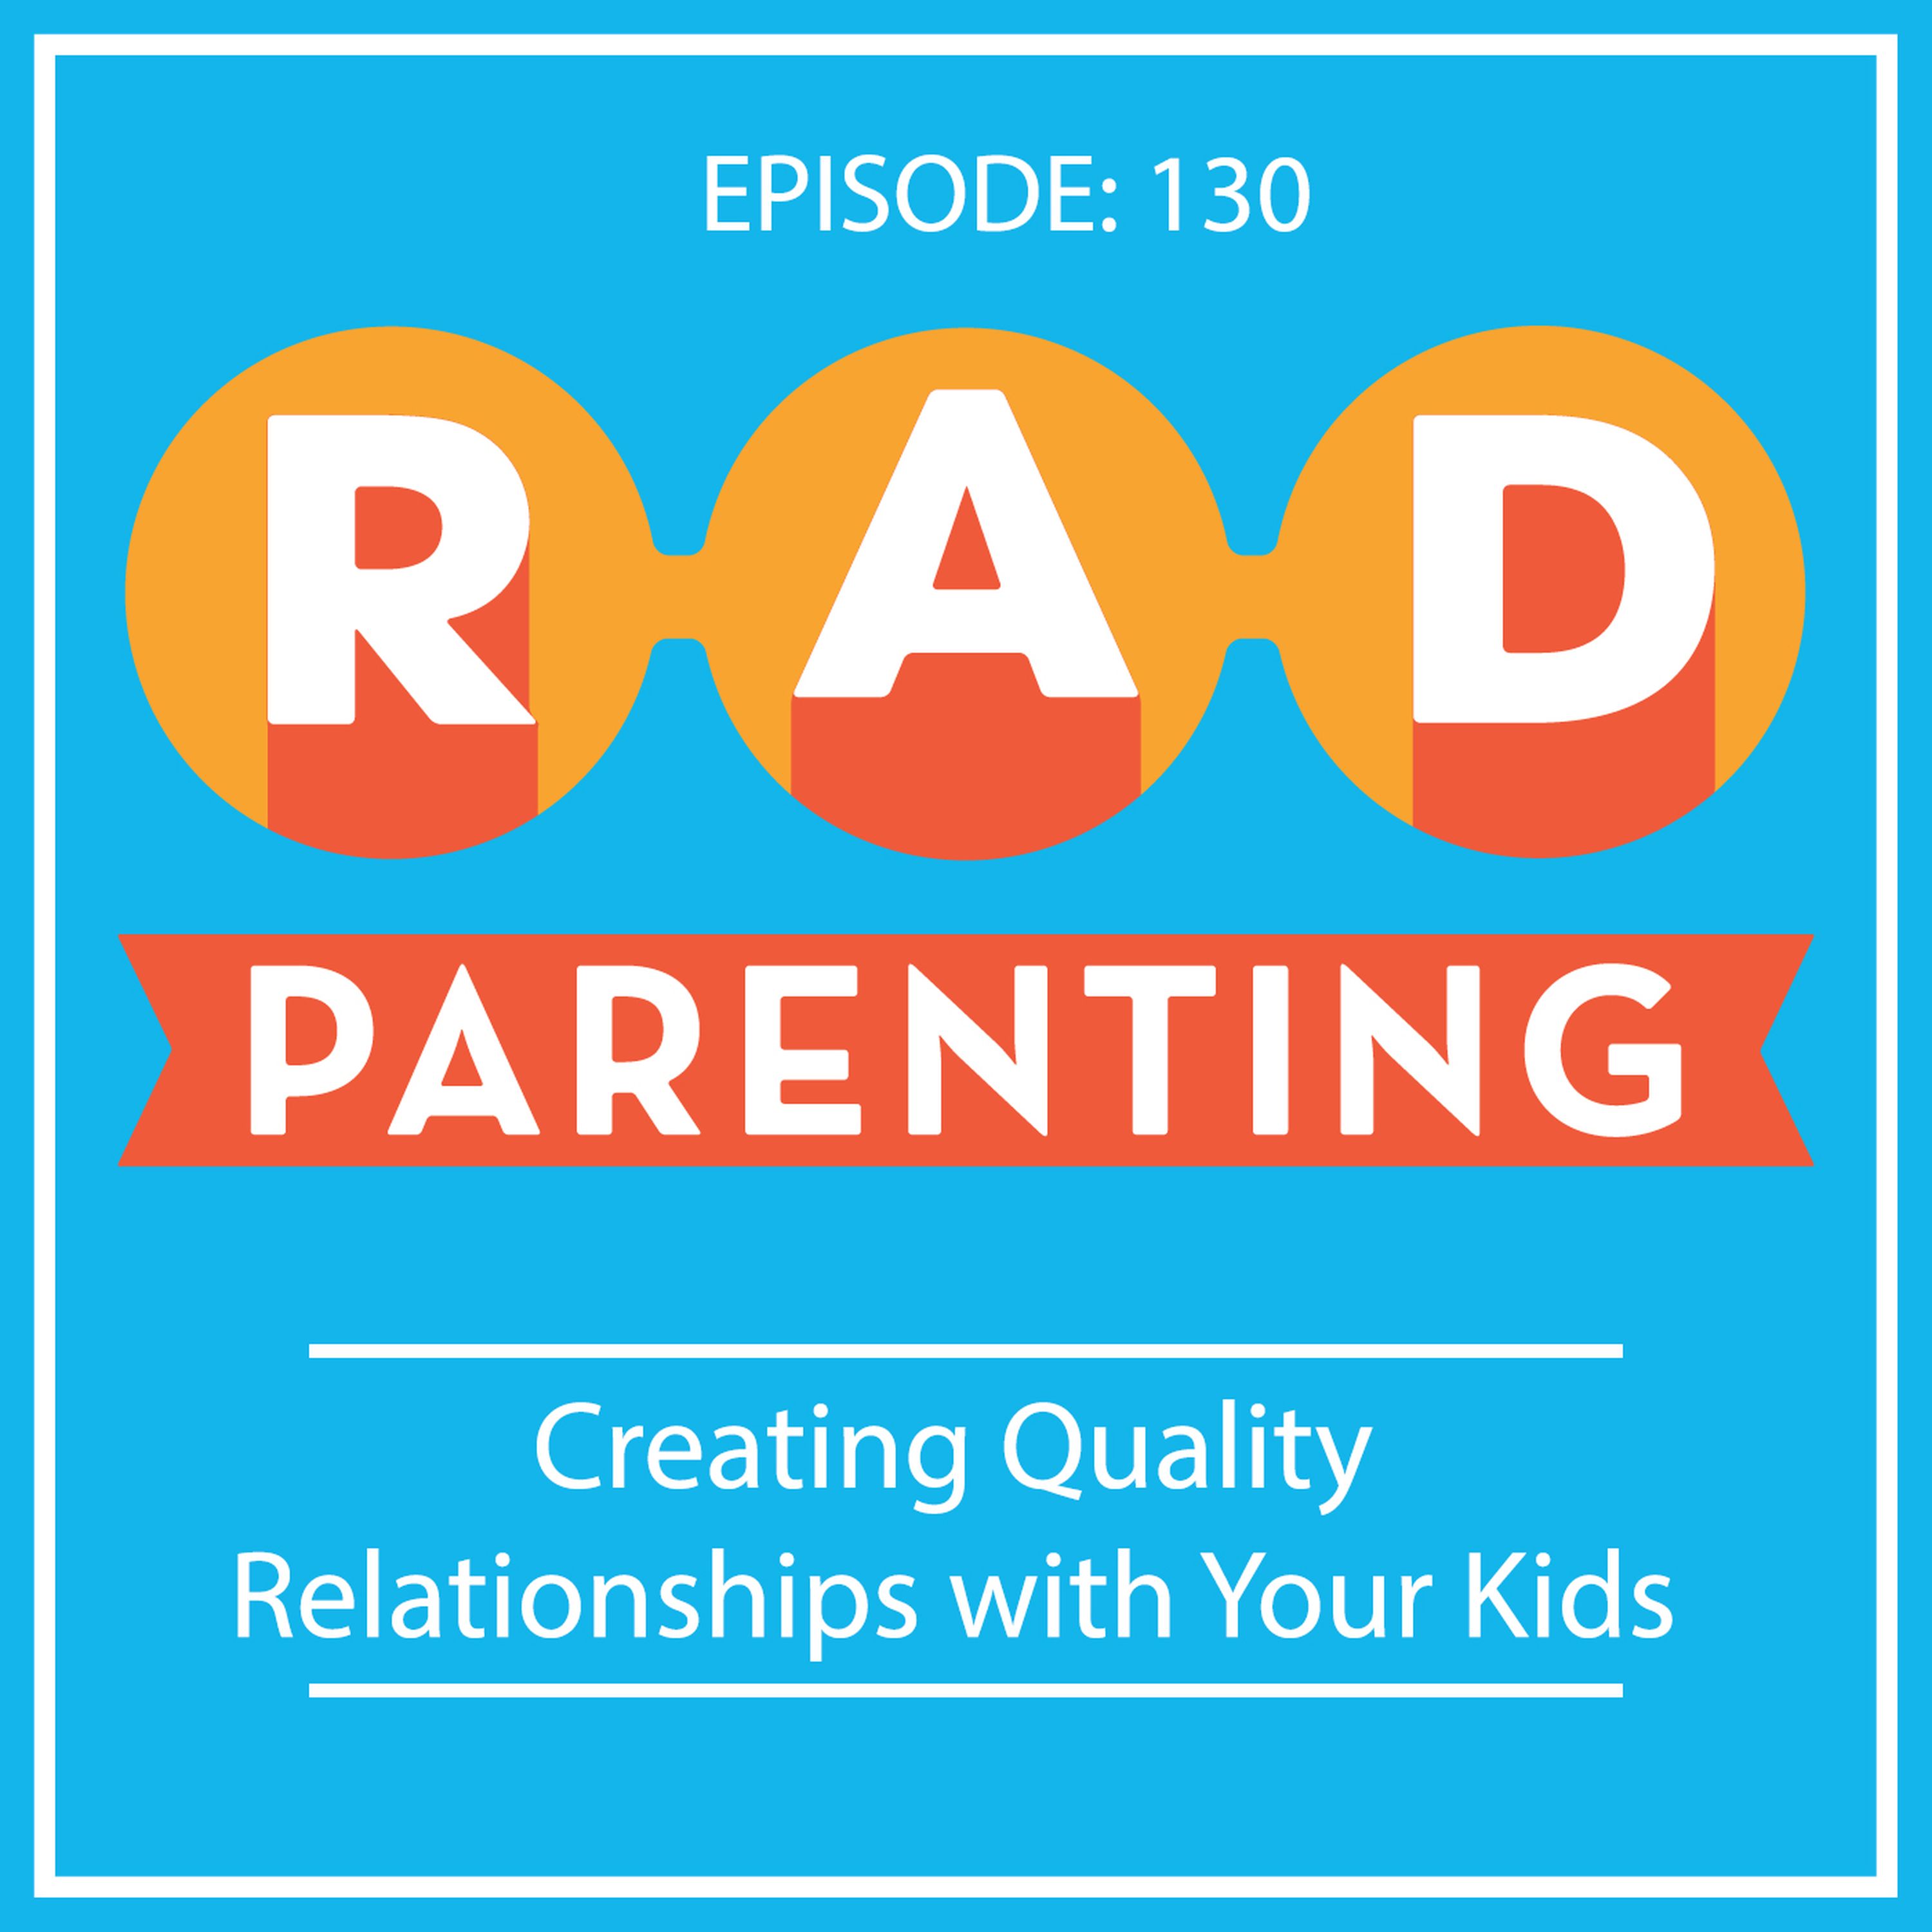 Creating Quality Relationships with Your Kids